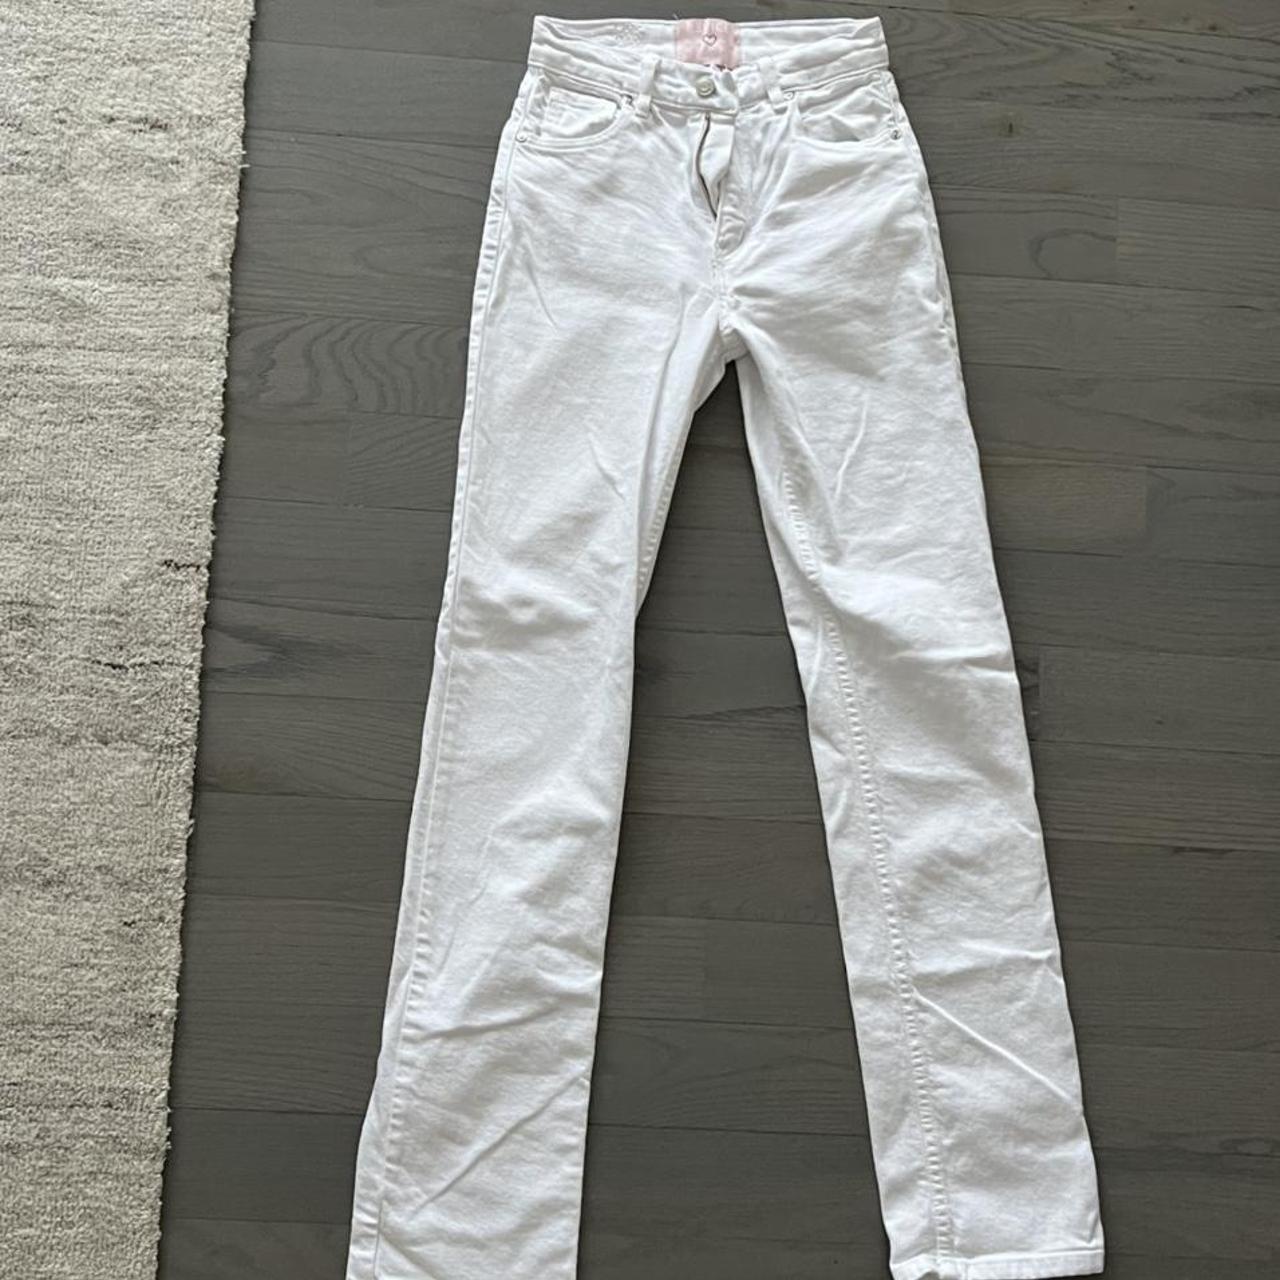 REVICE DENIM WHITE JEANS ; SOLD OUT ONLINE ; SIZE... - Depop